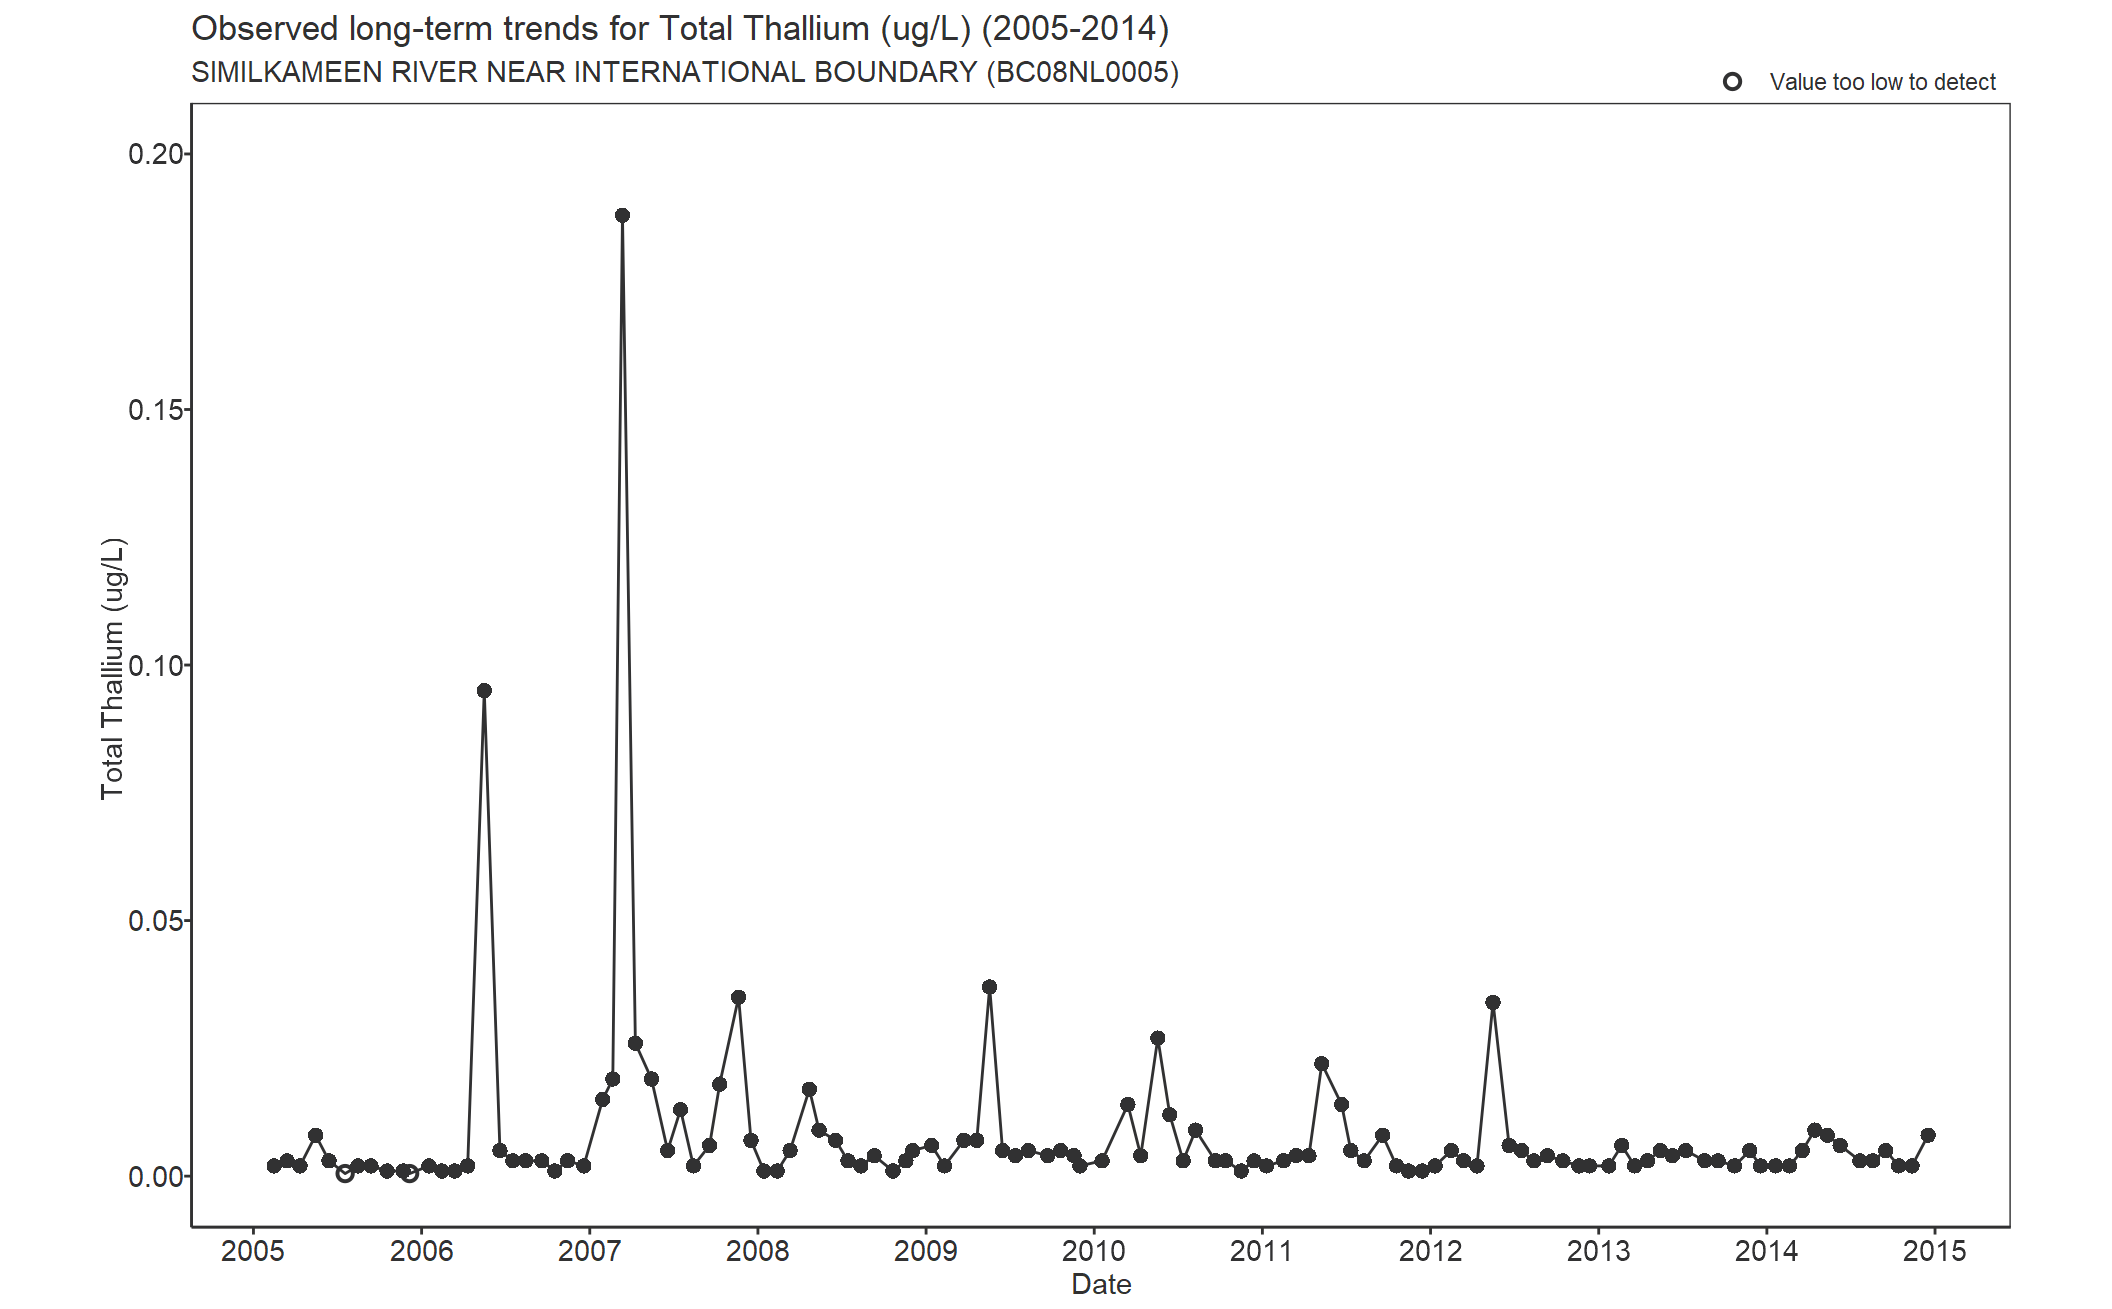 Observed long-term trends for Total Thallium (2005-2014)